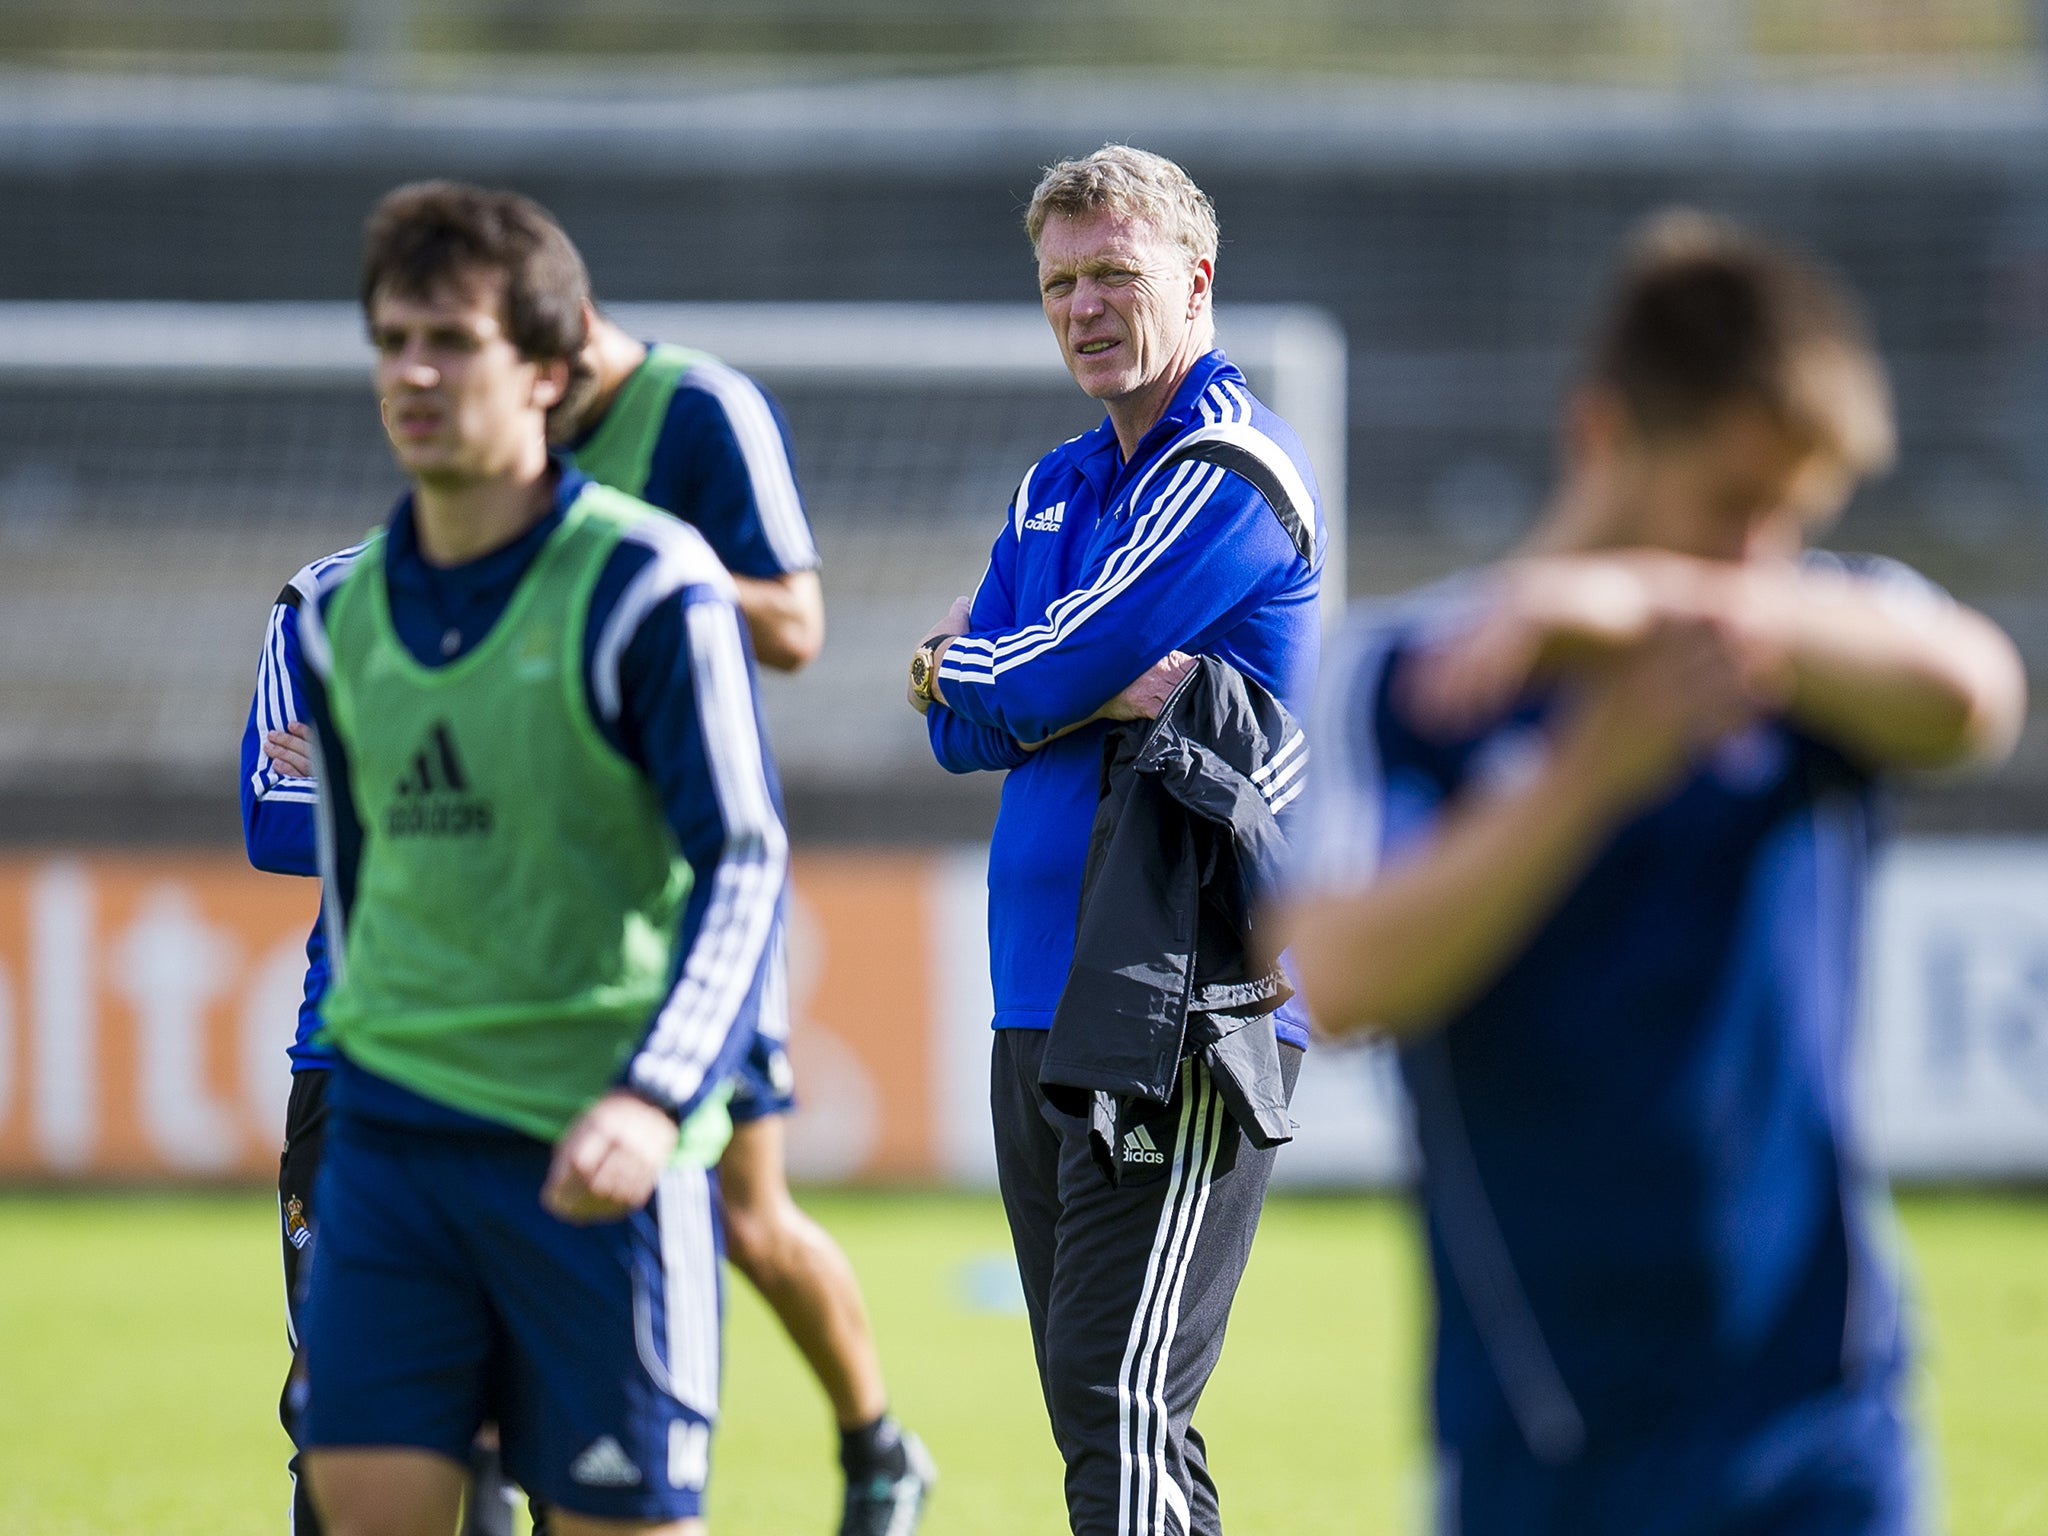 David Moyes oversees a Real Sociedad training session at the Zubieta training
ground yesterday